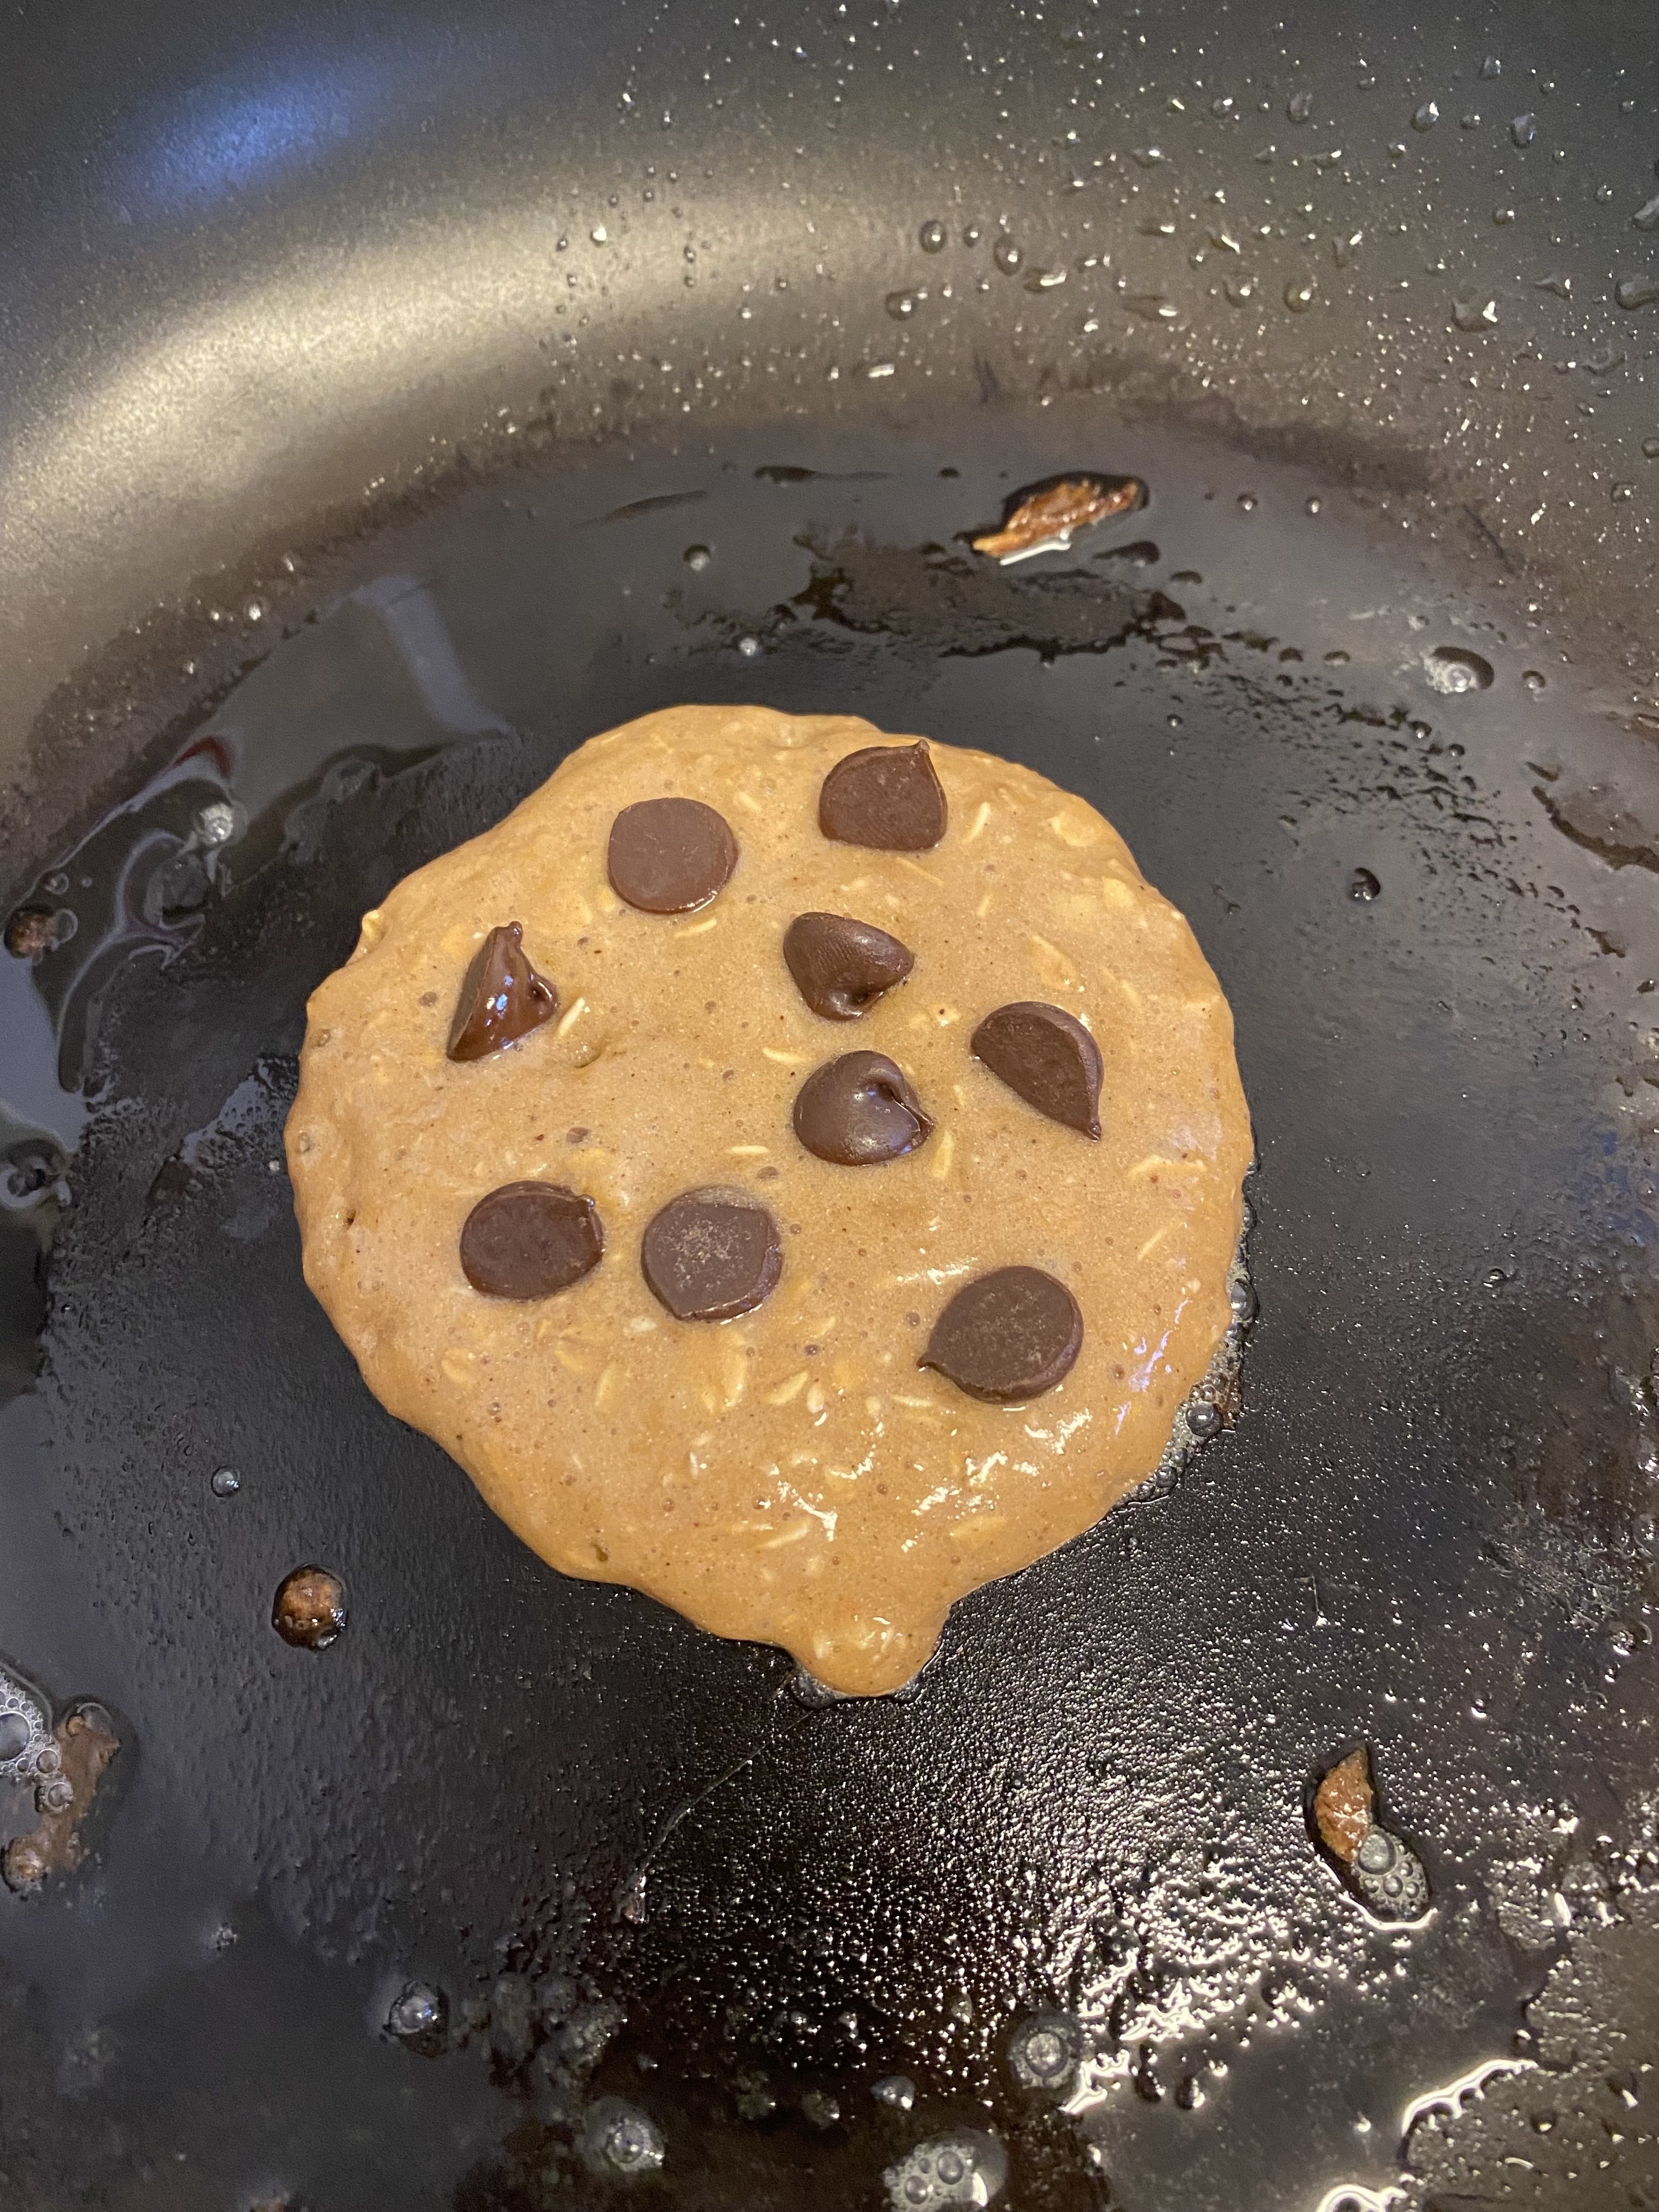 The pancake sizzling in the pan with chocolate chips added